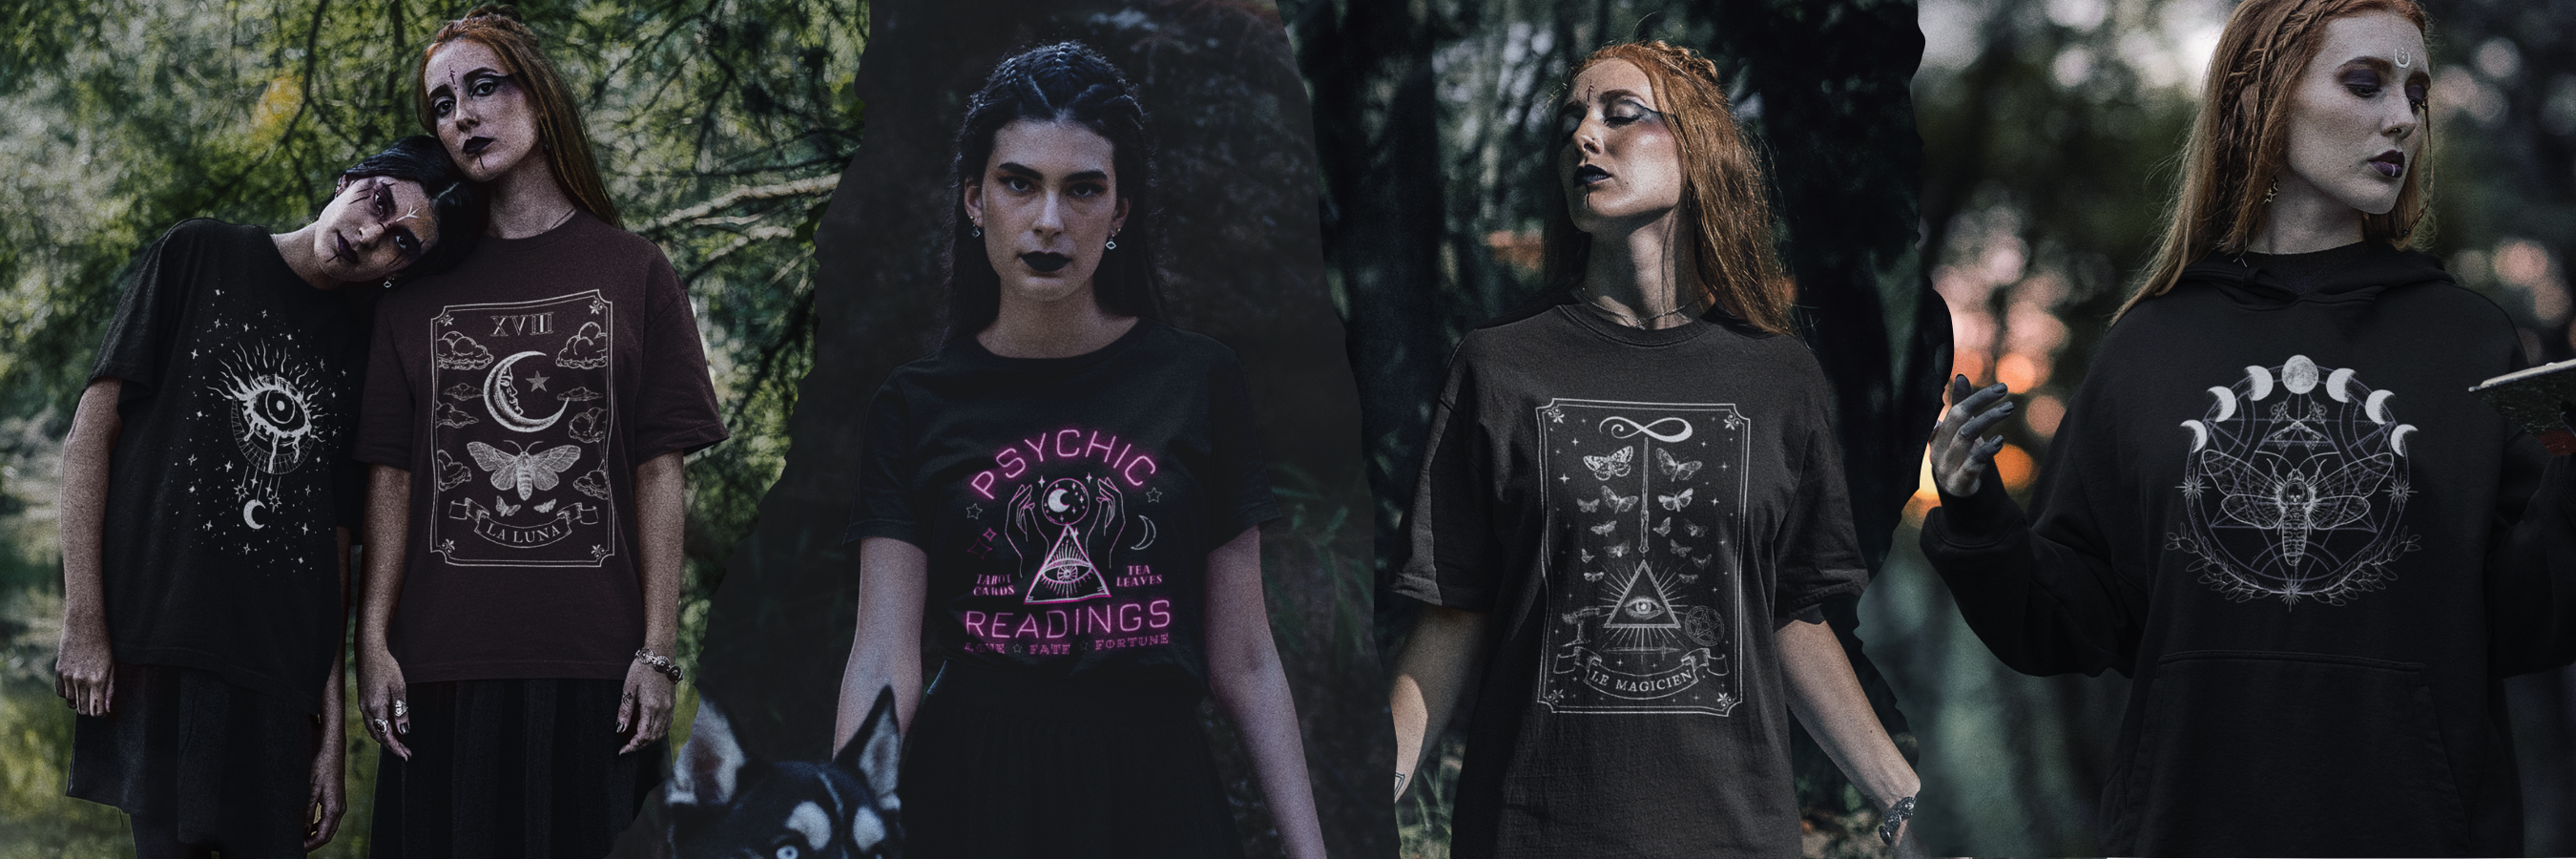 dark witchy aesthetic clothing store